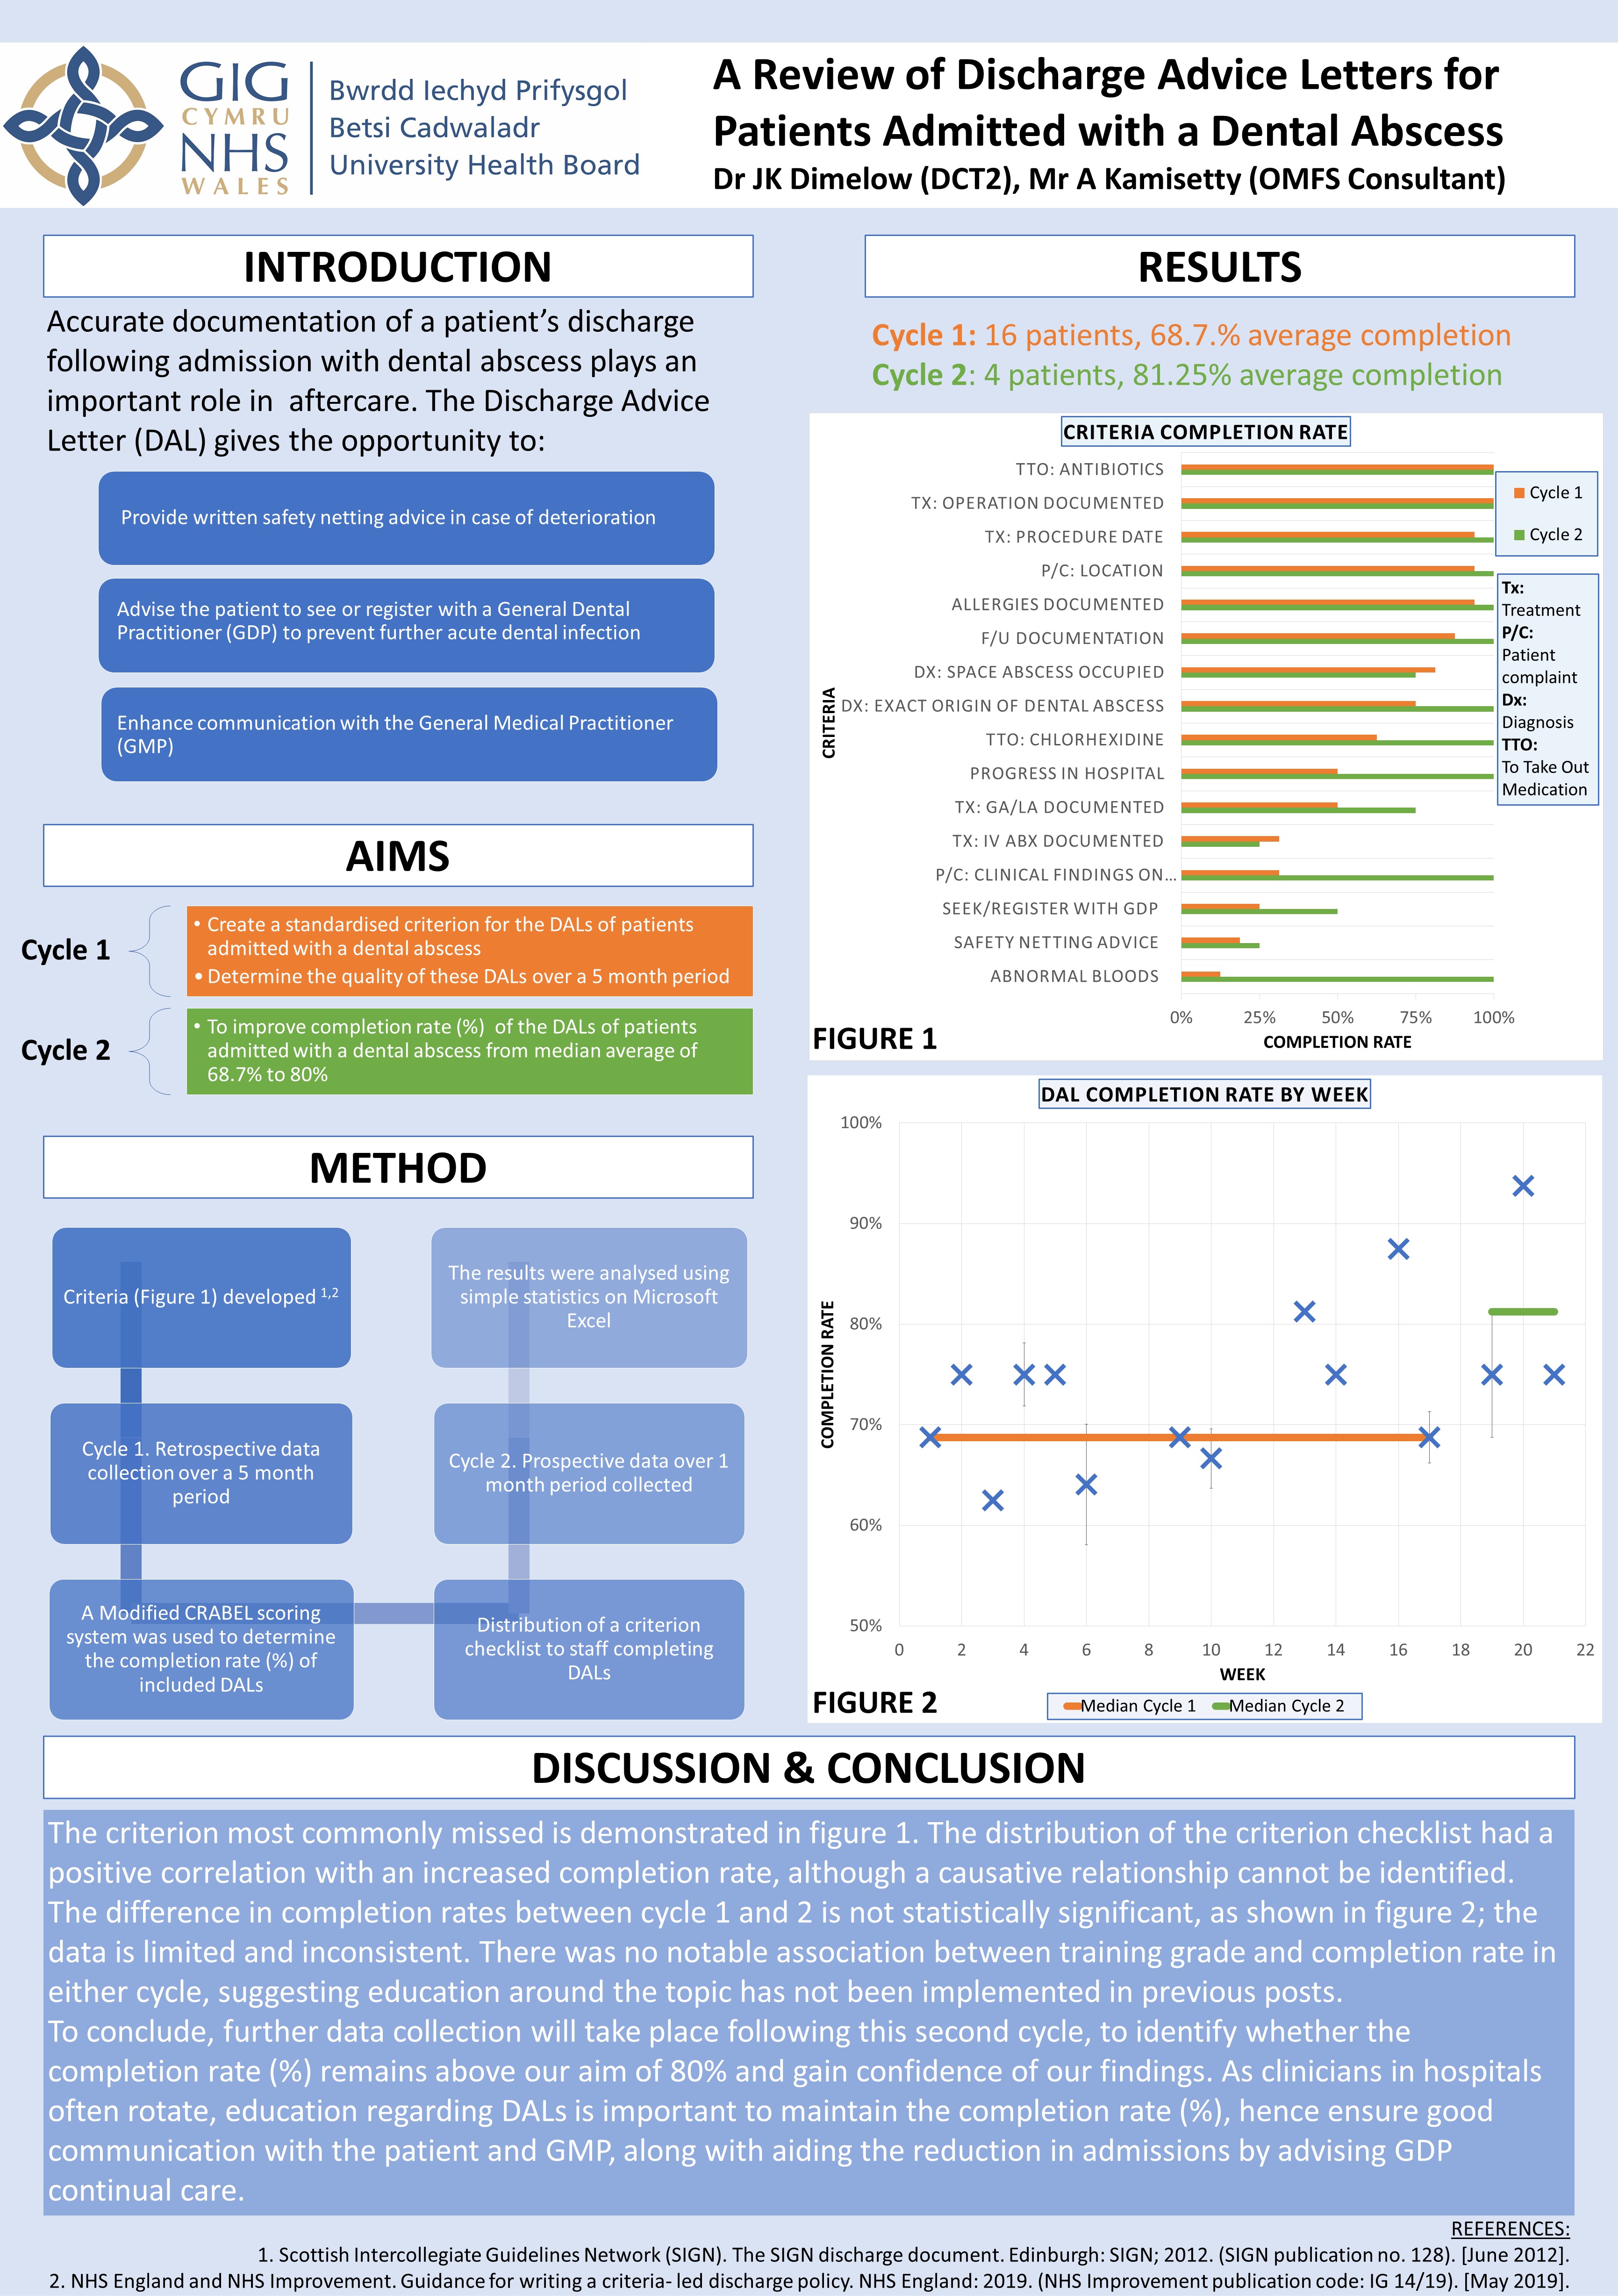 Poster A Review of Discharge Advice Letters for Patients Admitted with a Dental Abscess